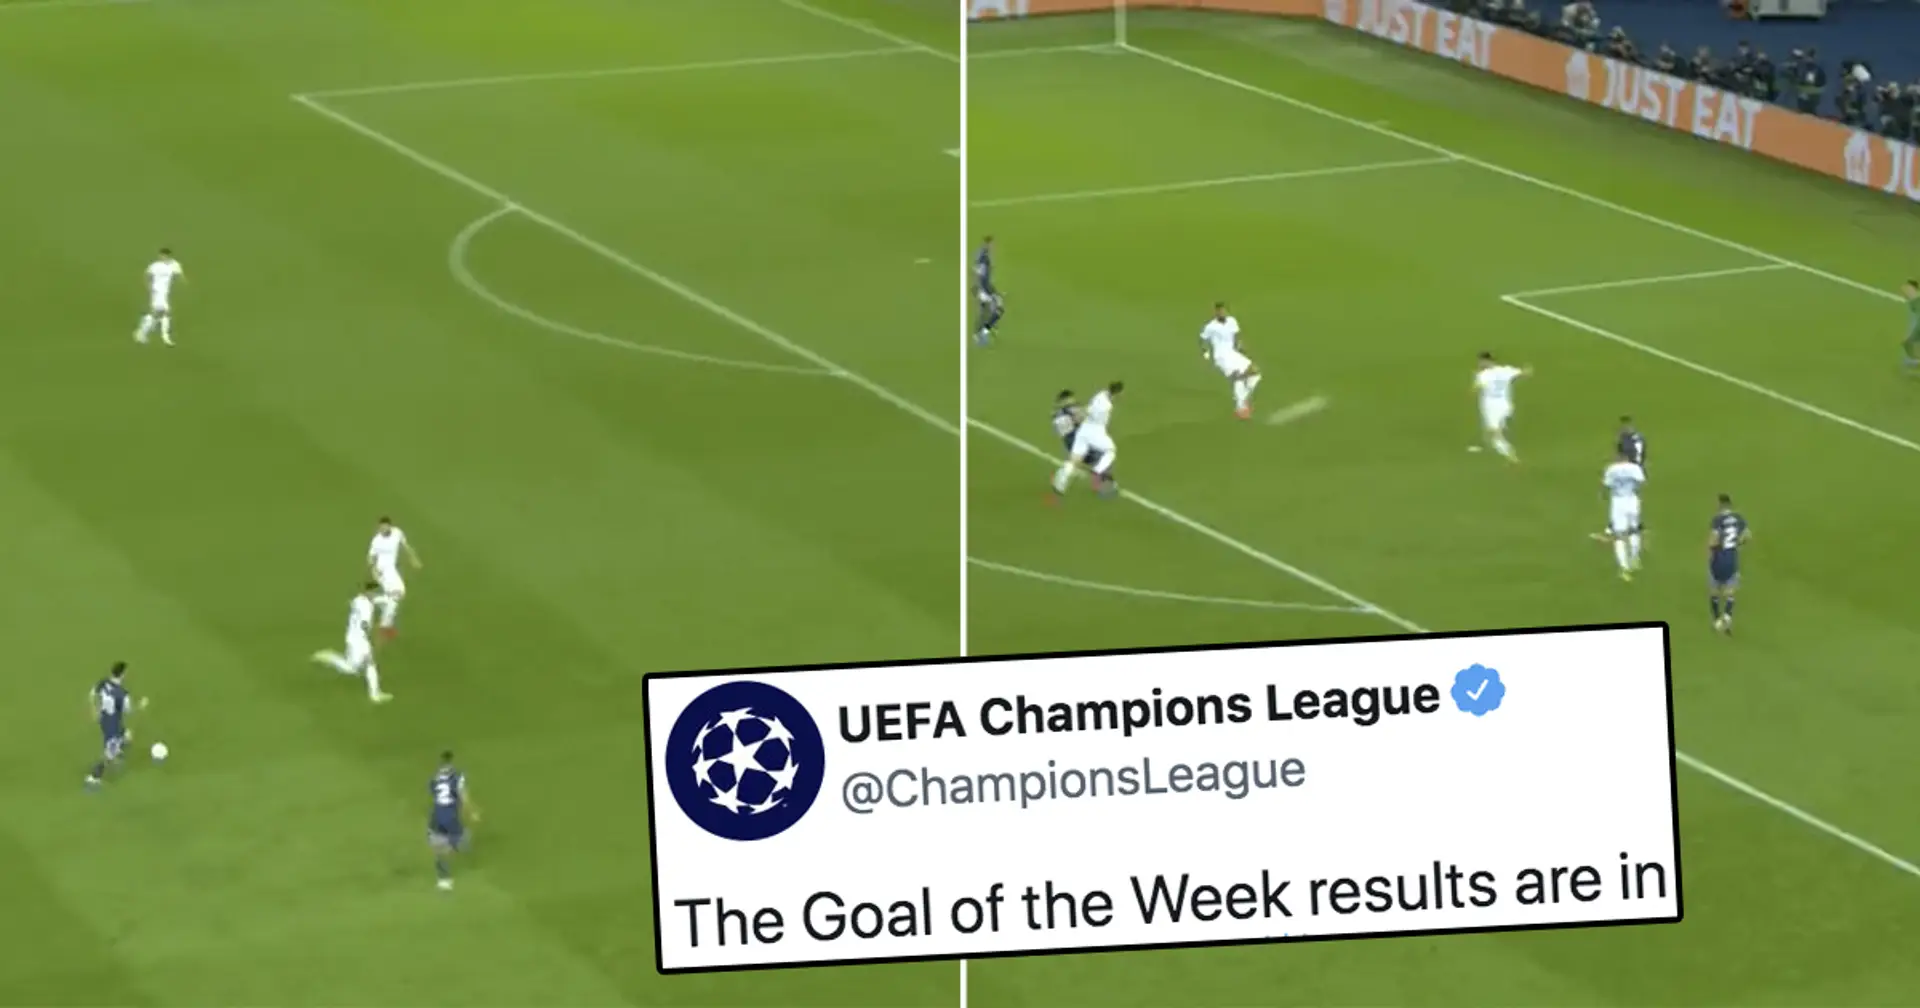 Messi's Man City goal named Champions League Goal of the Week